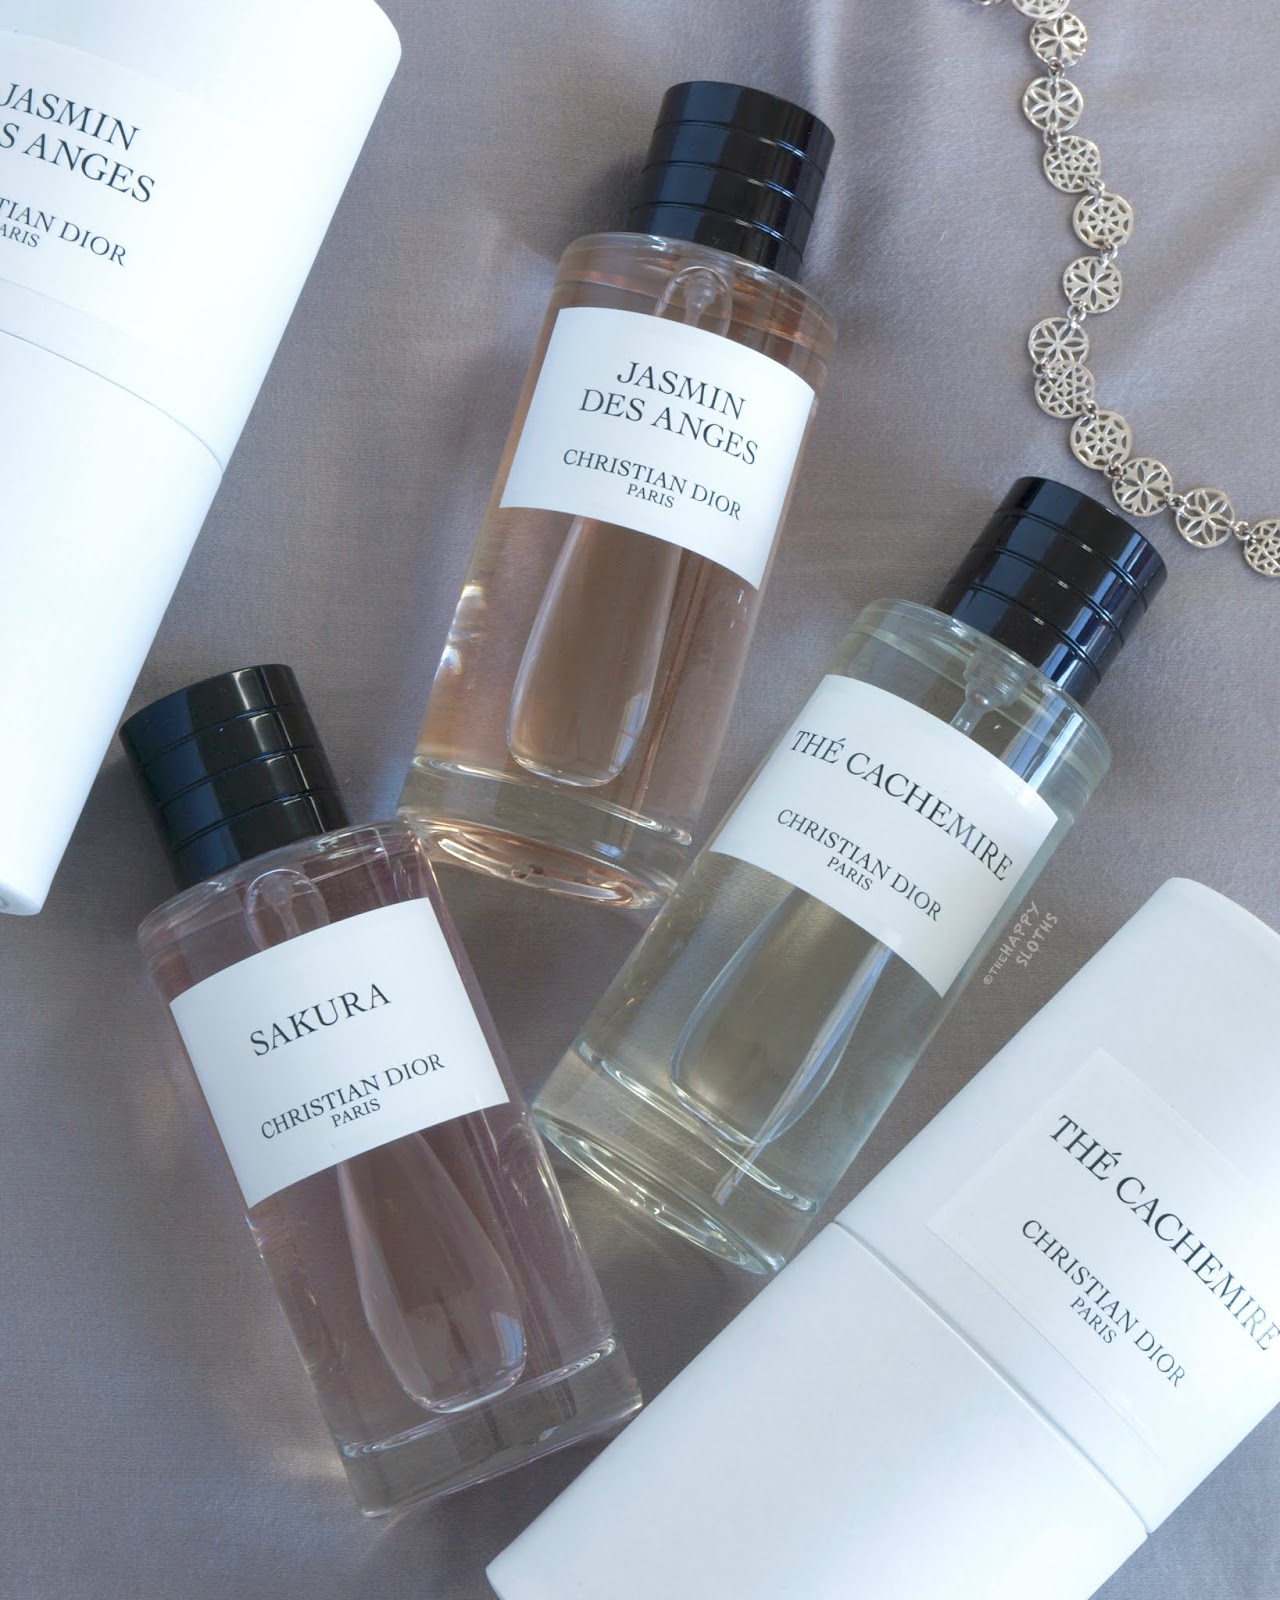 Dior | Maison Christian Dior Perfume Collection in "Jasmin Des Anges", "Sakura" & "Thé Cachemire": Review